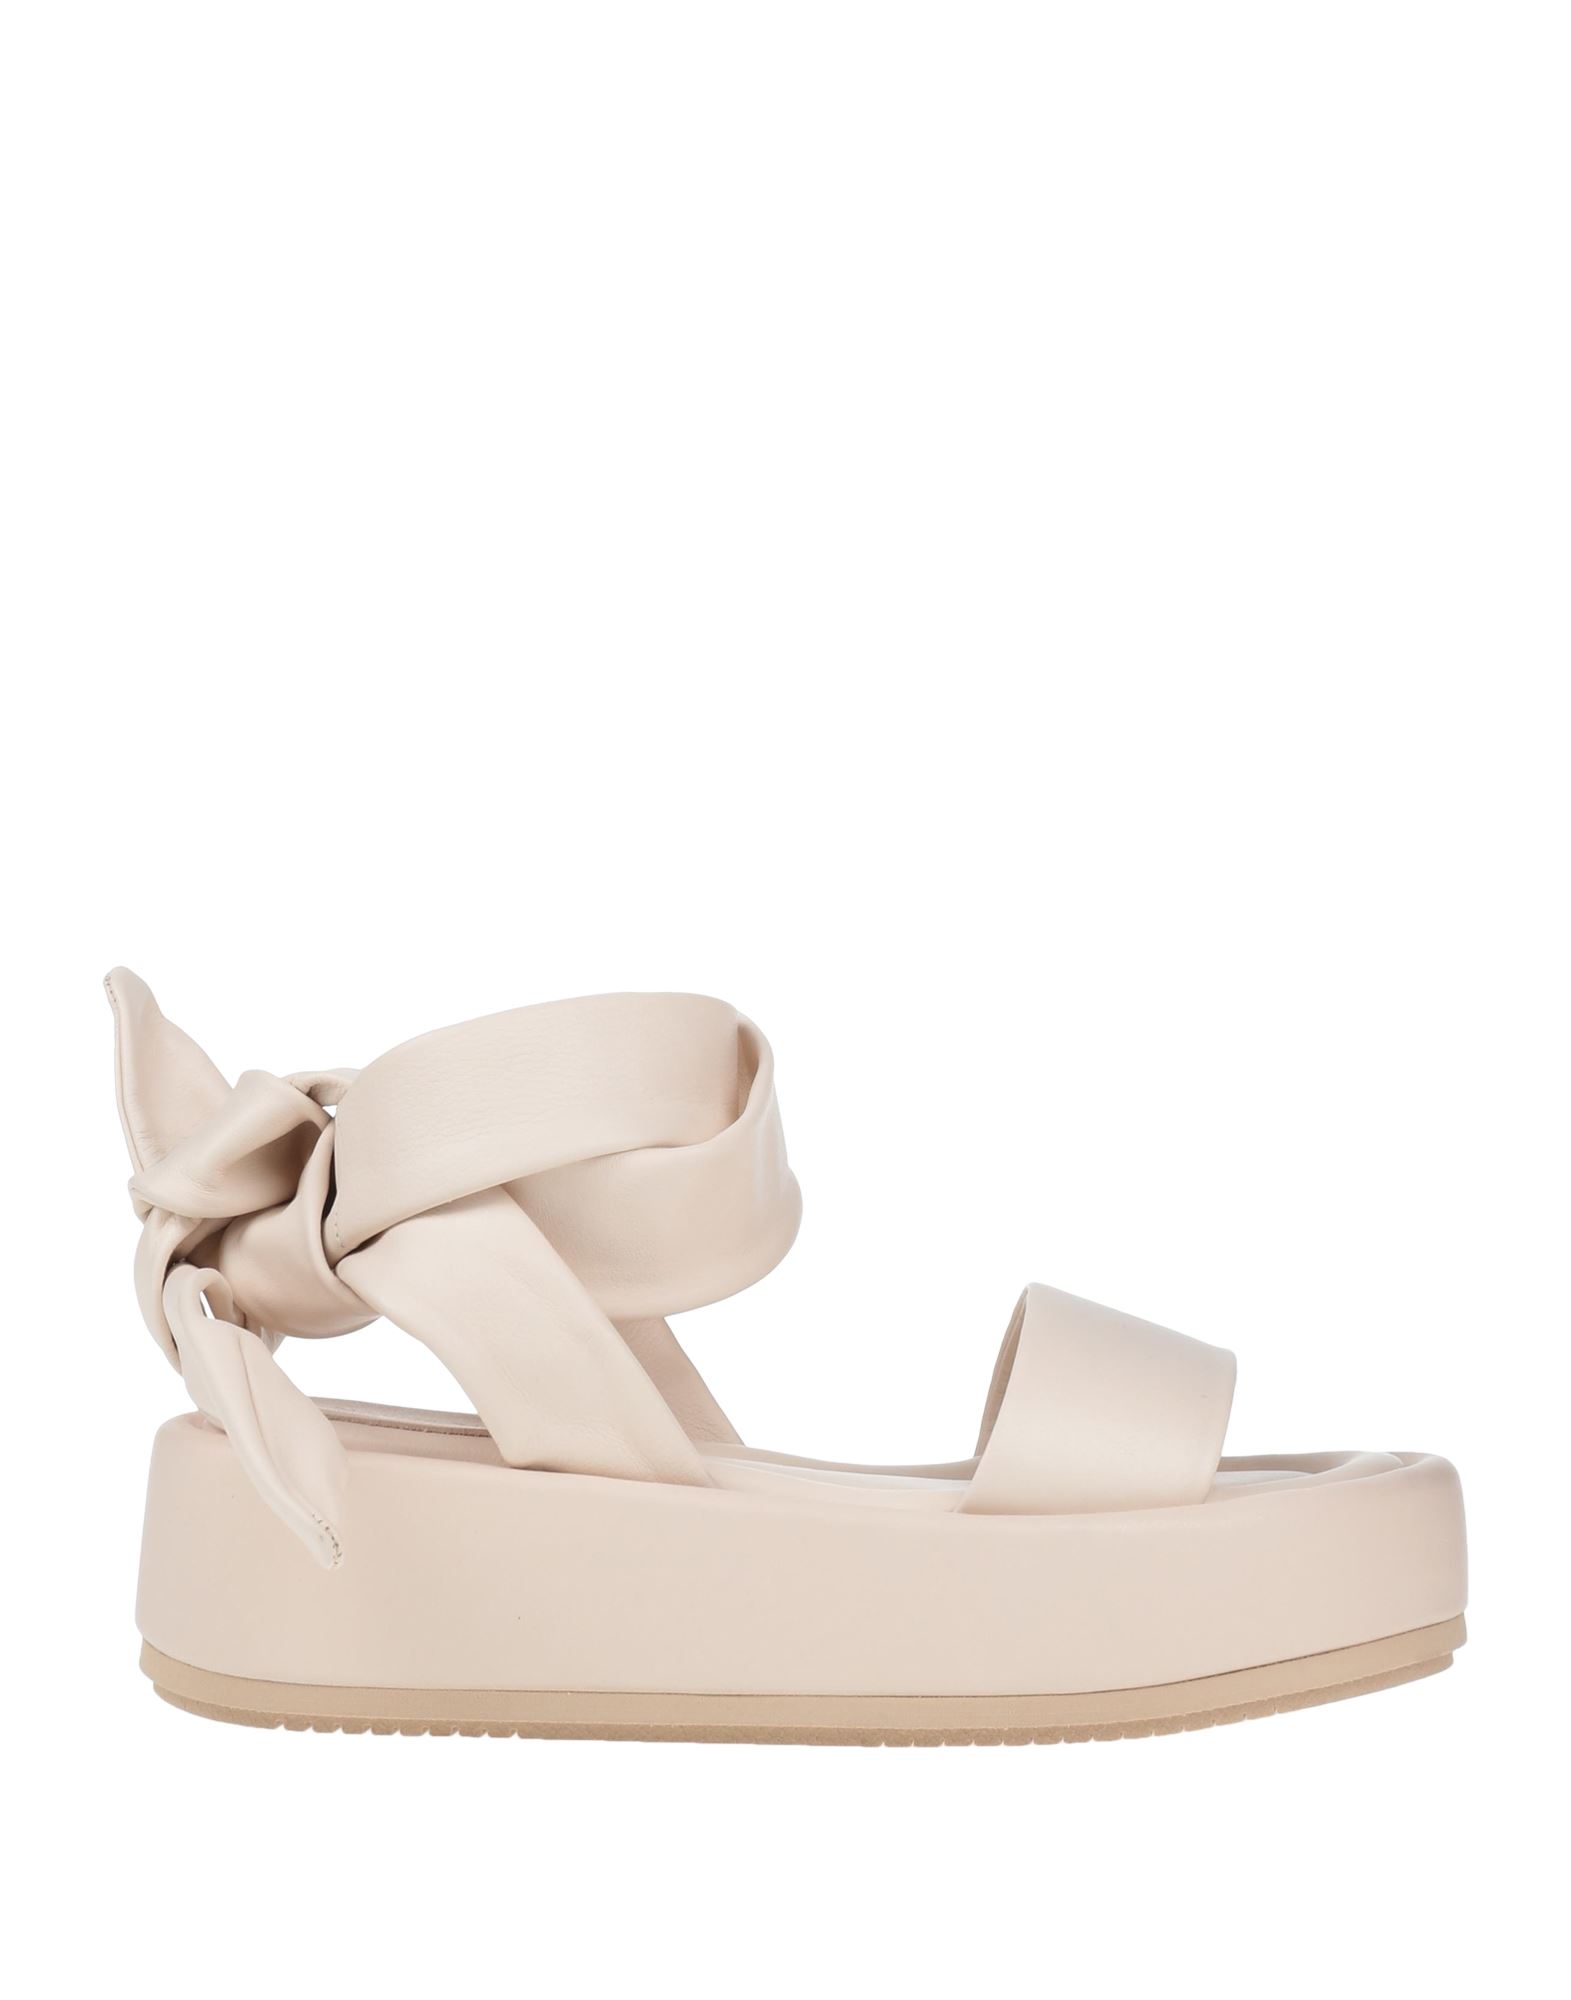 Paloma Barceló Sandals In White